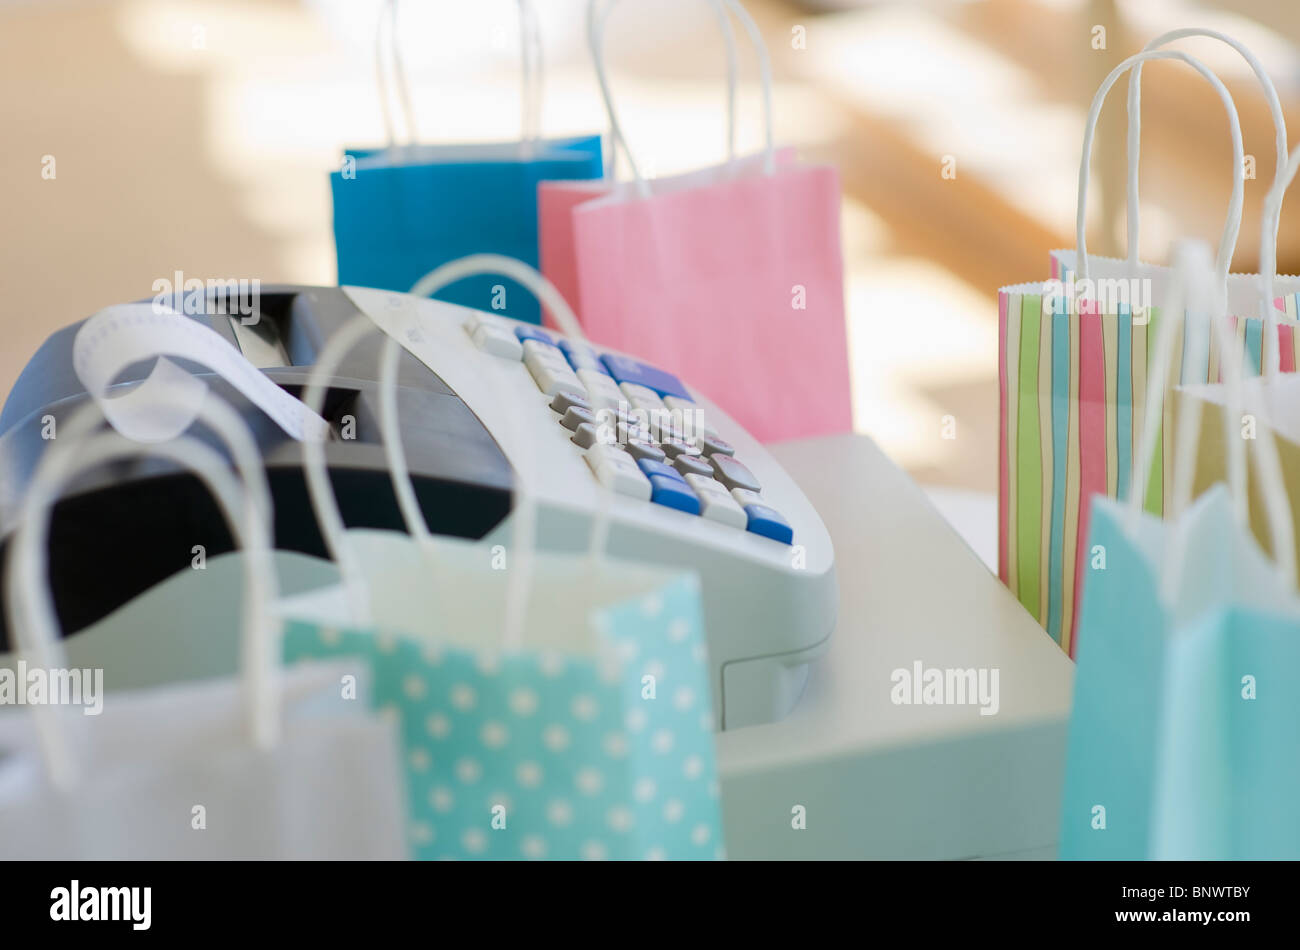 Cash register surrounded by colorful shopping bags Stock Photo